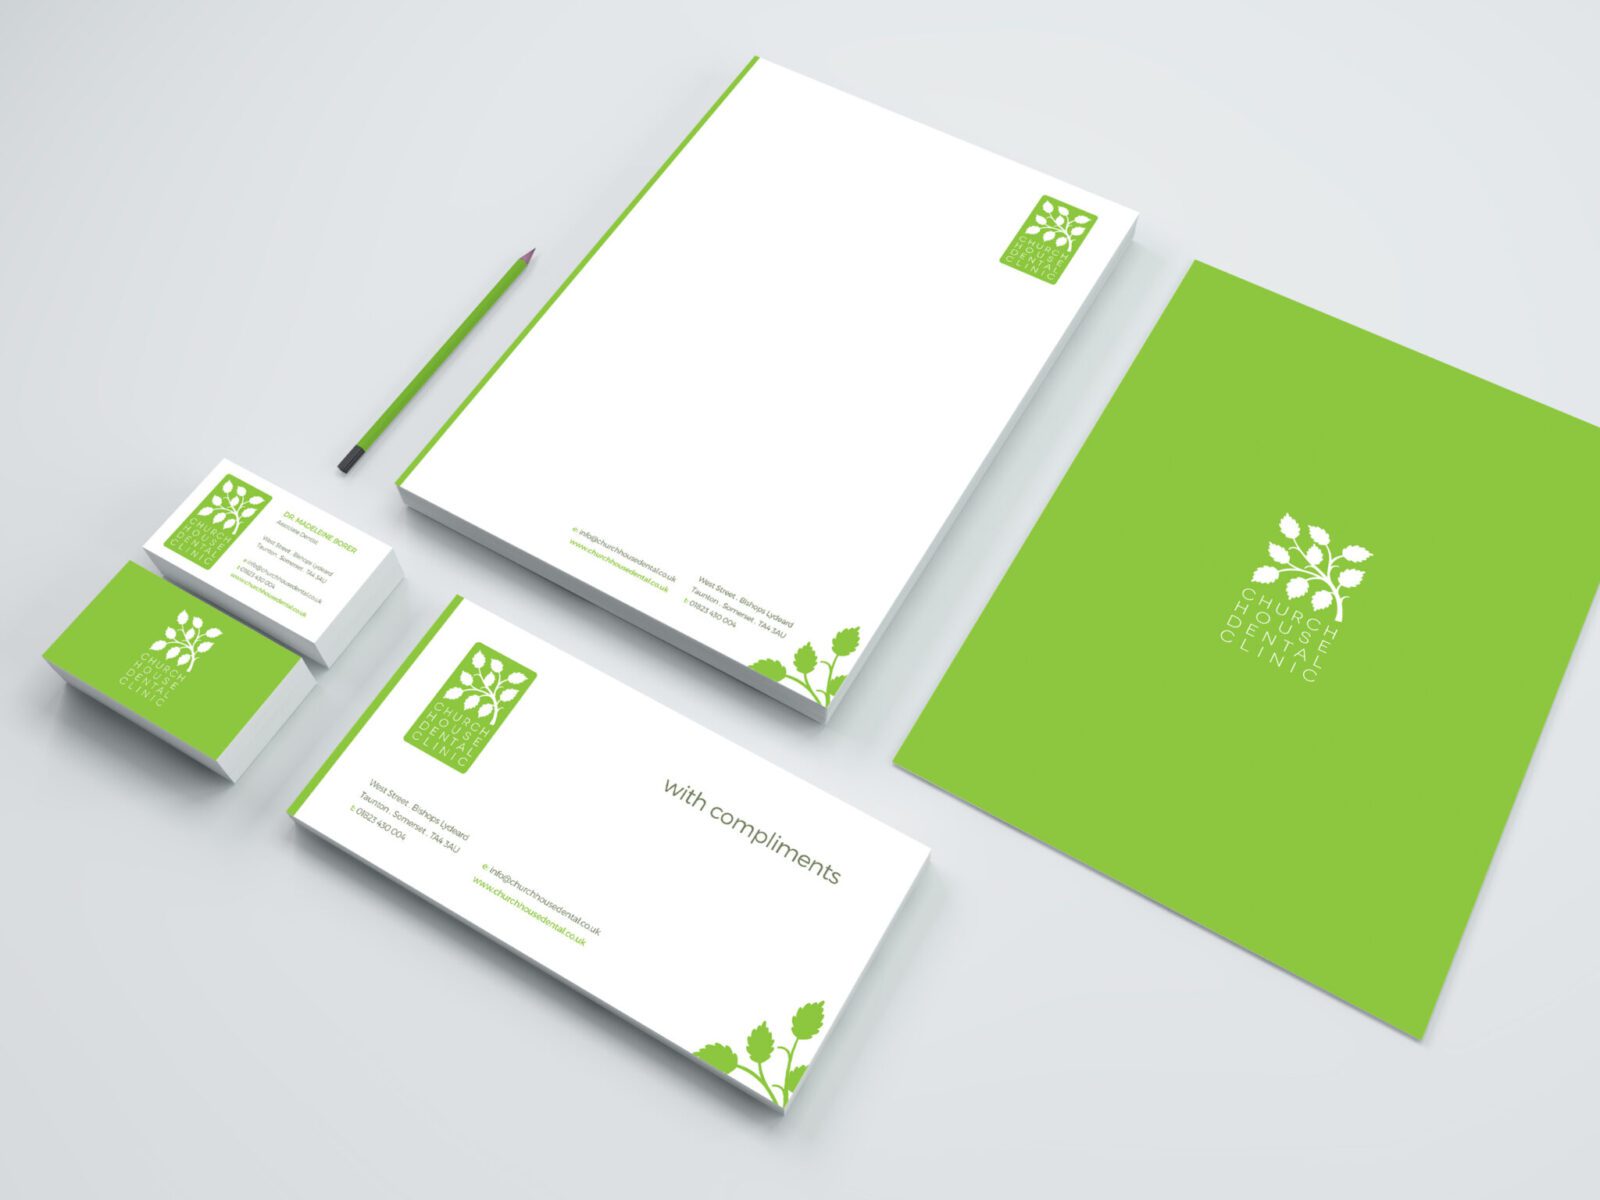 Mock-up of Church House Dental's brand and stationery design.